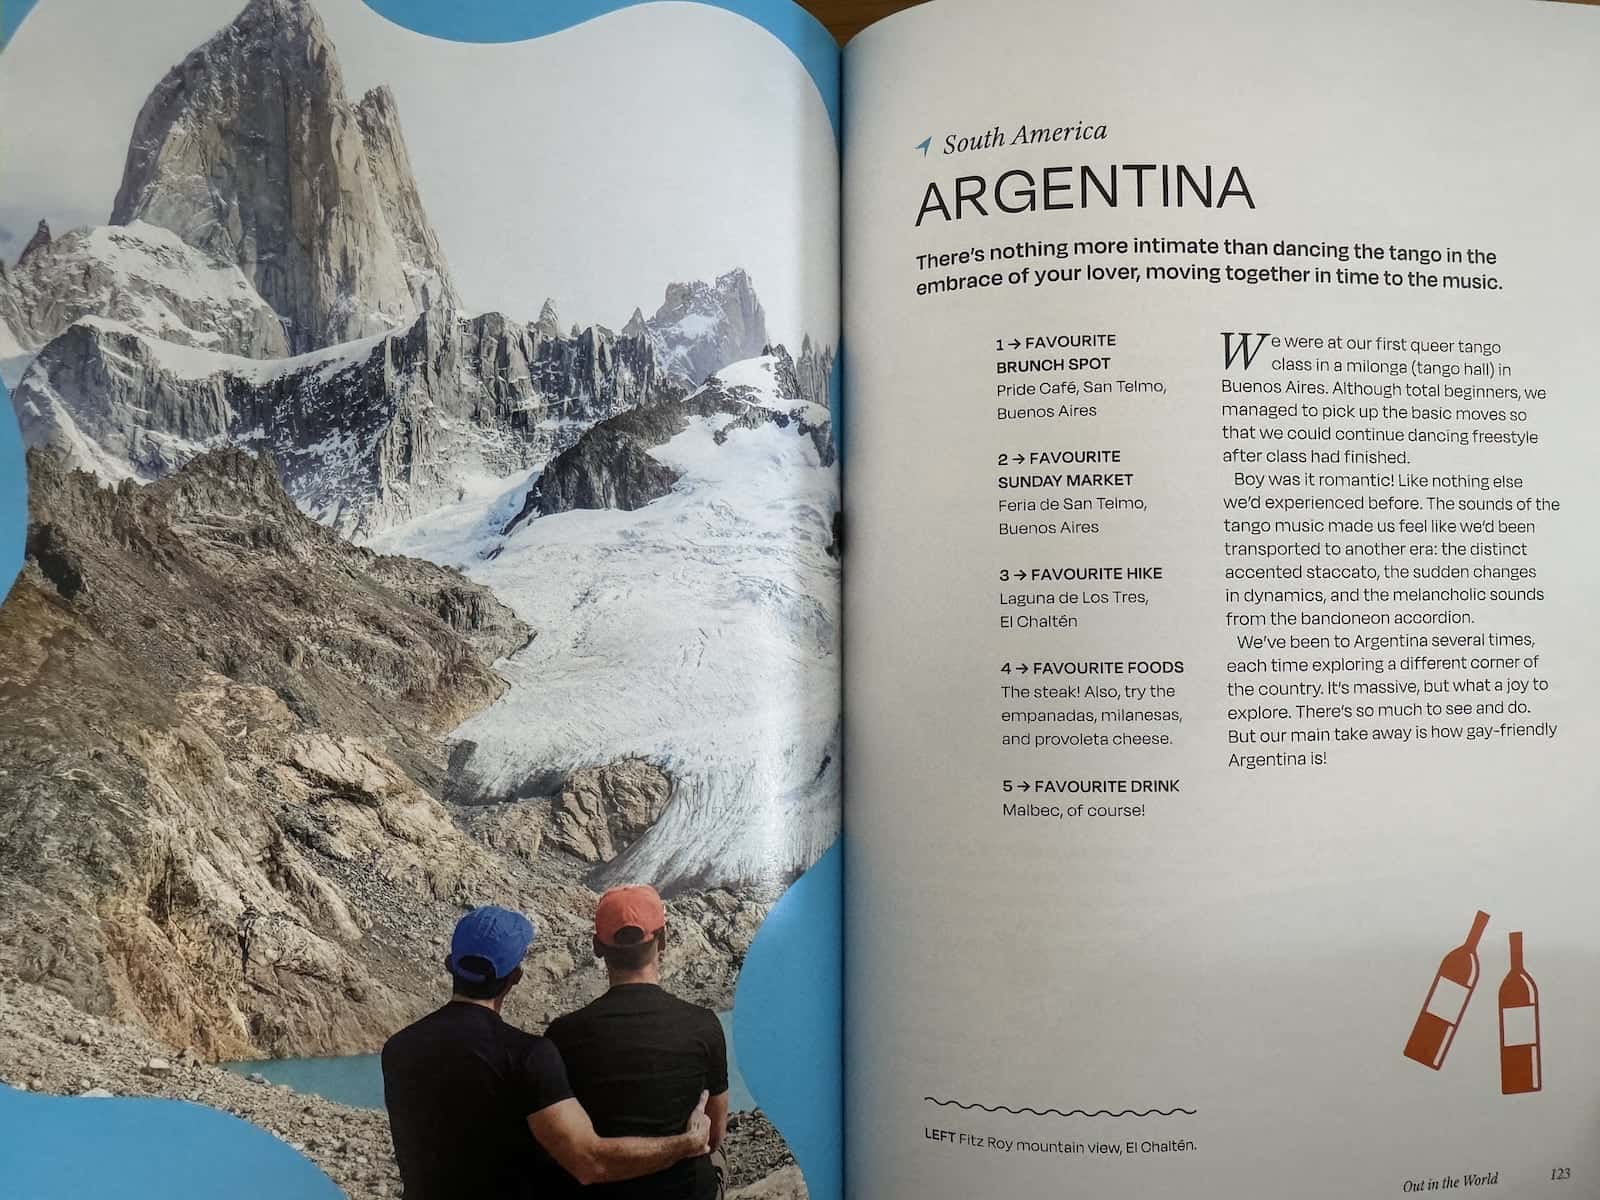 The Argentina section of our gay travel book.